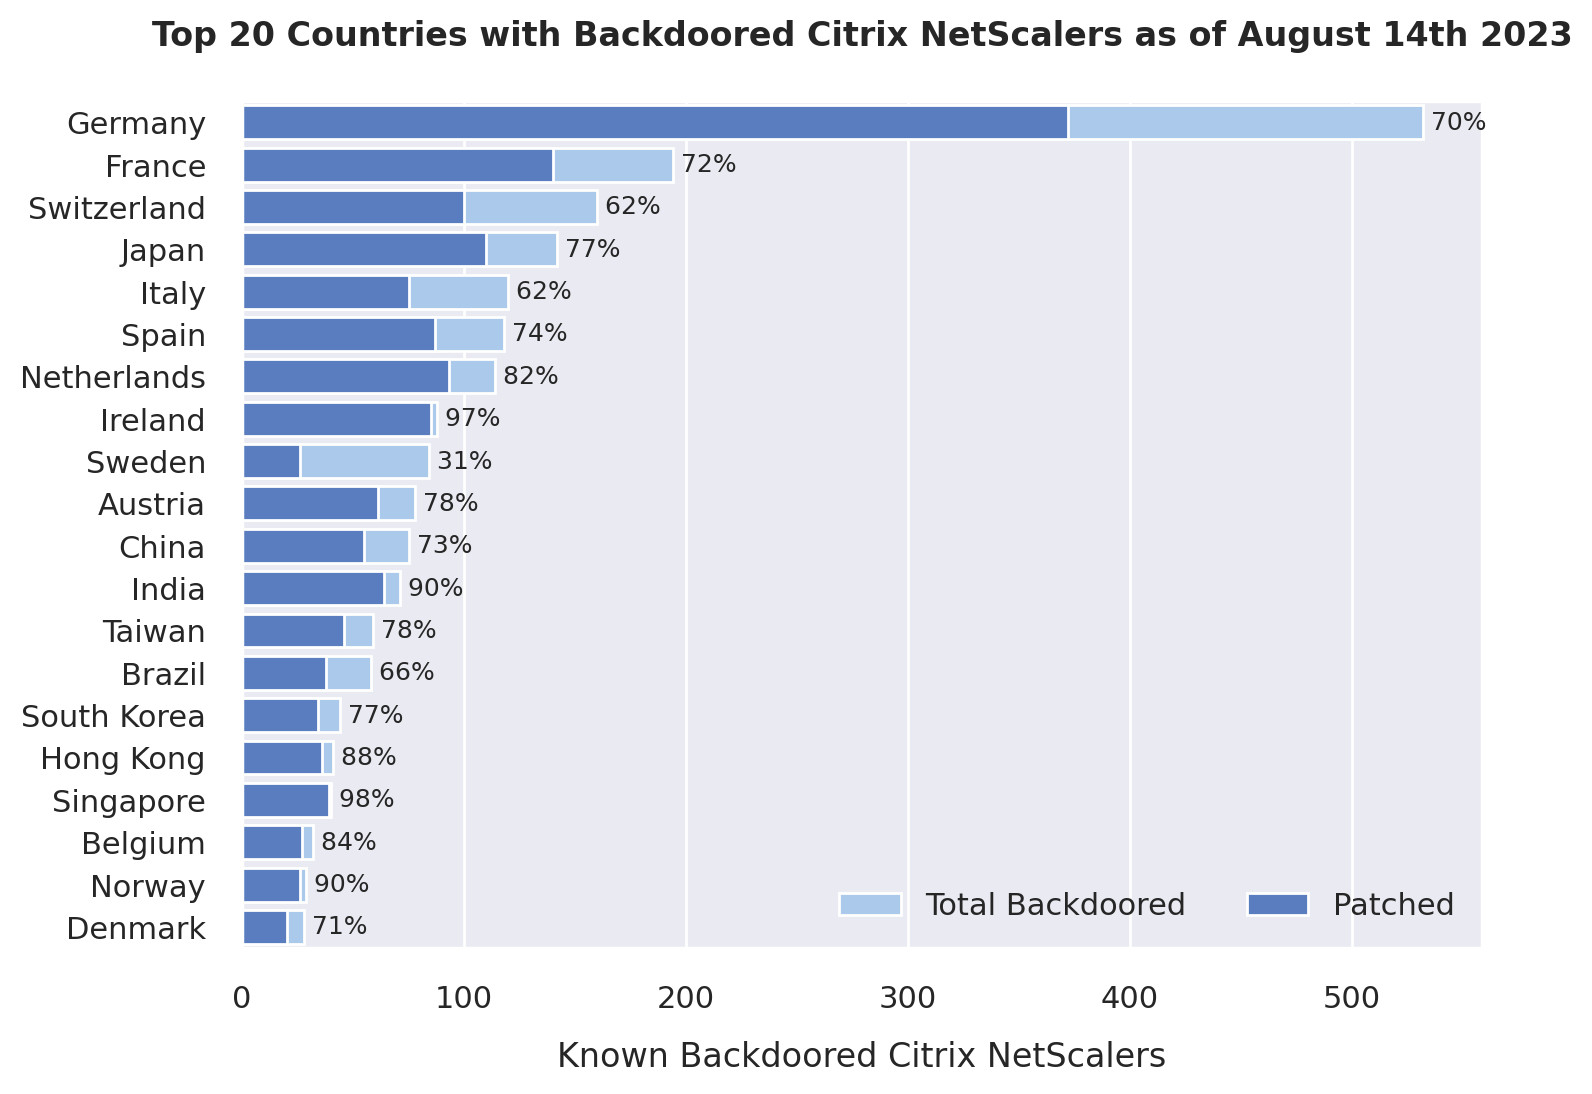 Top 20 countries with backdoored Citrix NetScaler servers